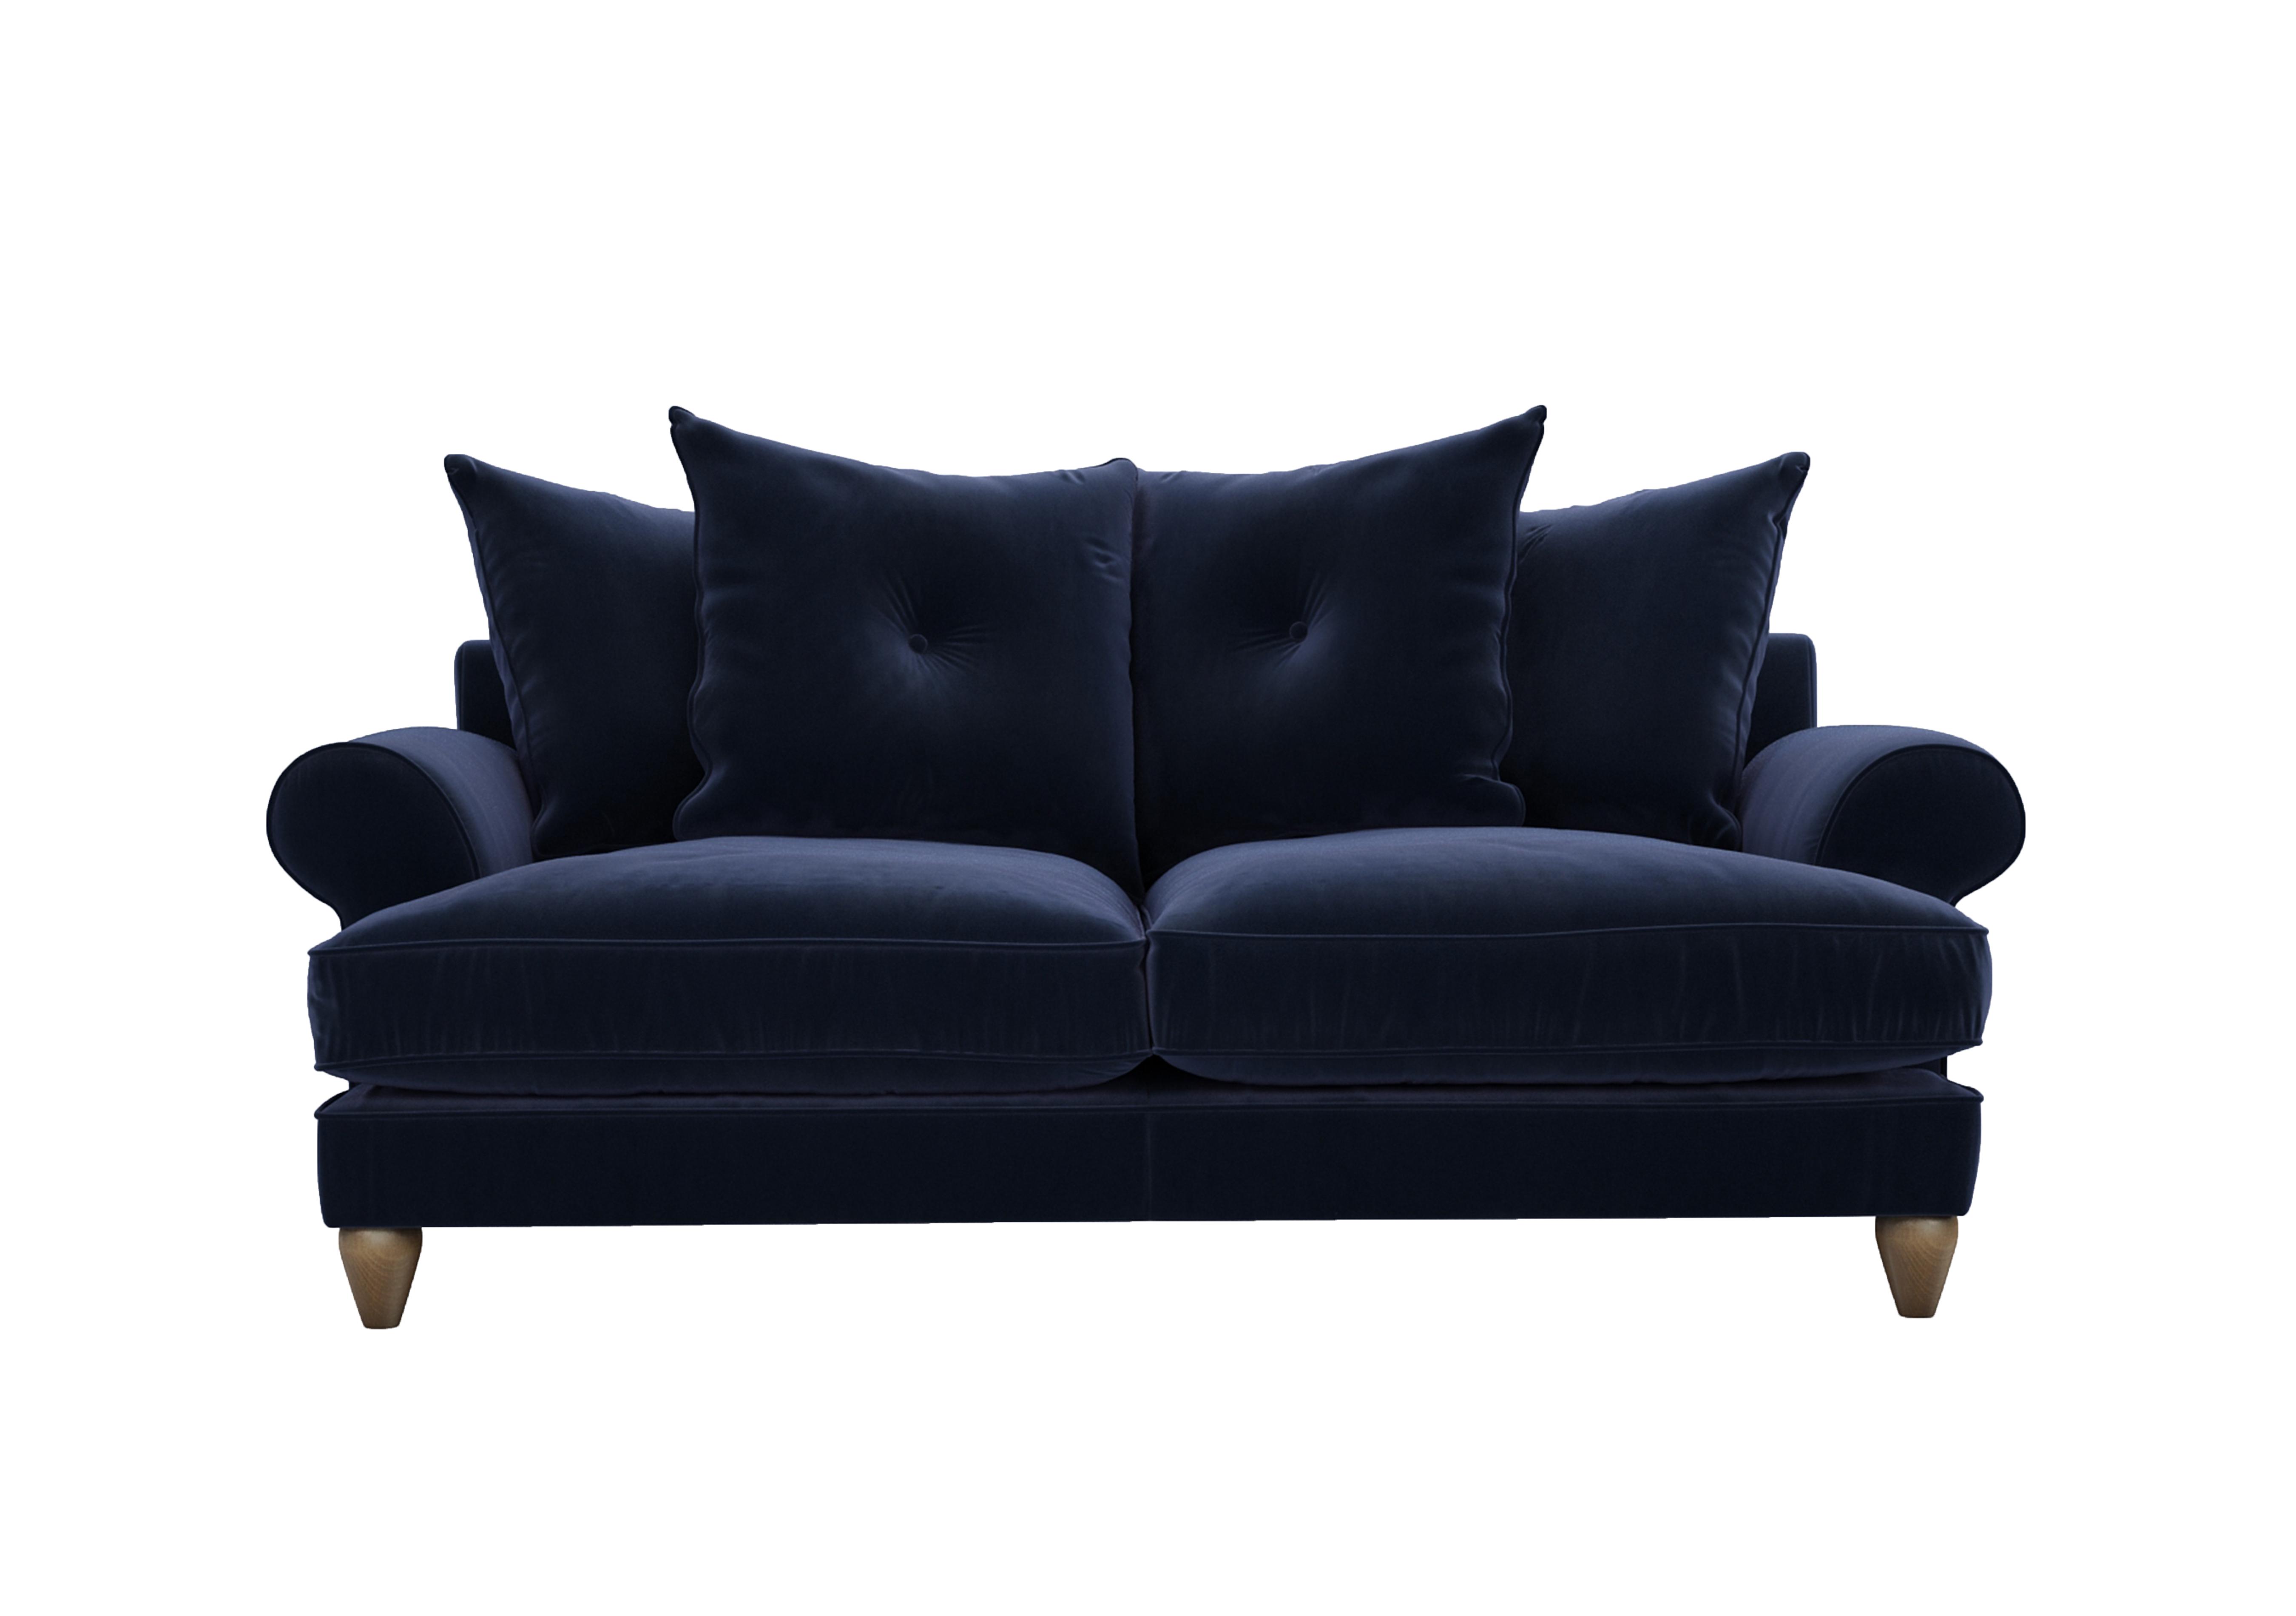 Bronwyn 3 Seater Fabric Scatter Back Sofa in Mid009 Midnight Indigo on Furniture Village